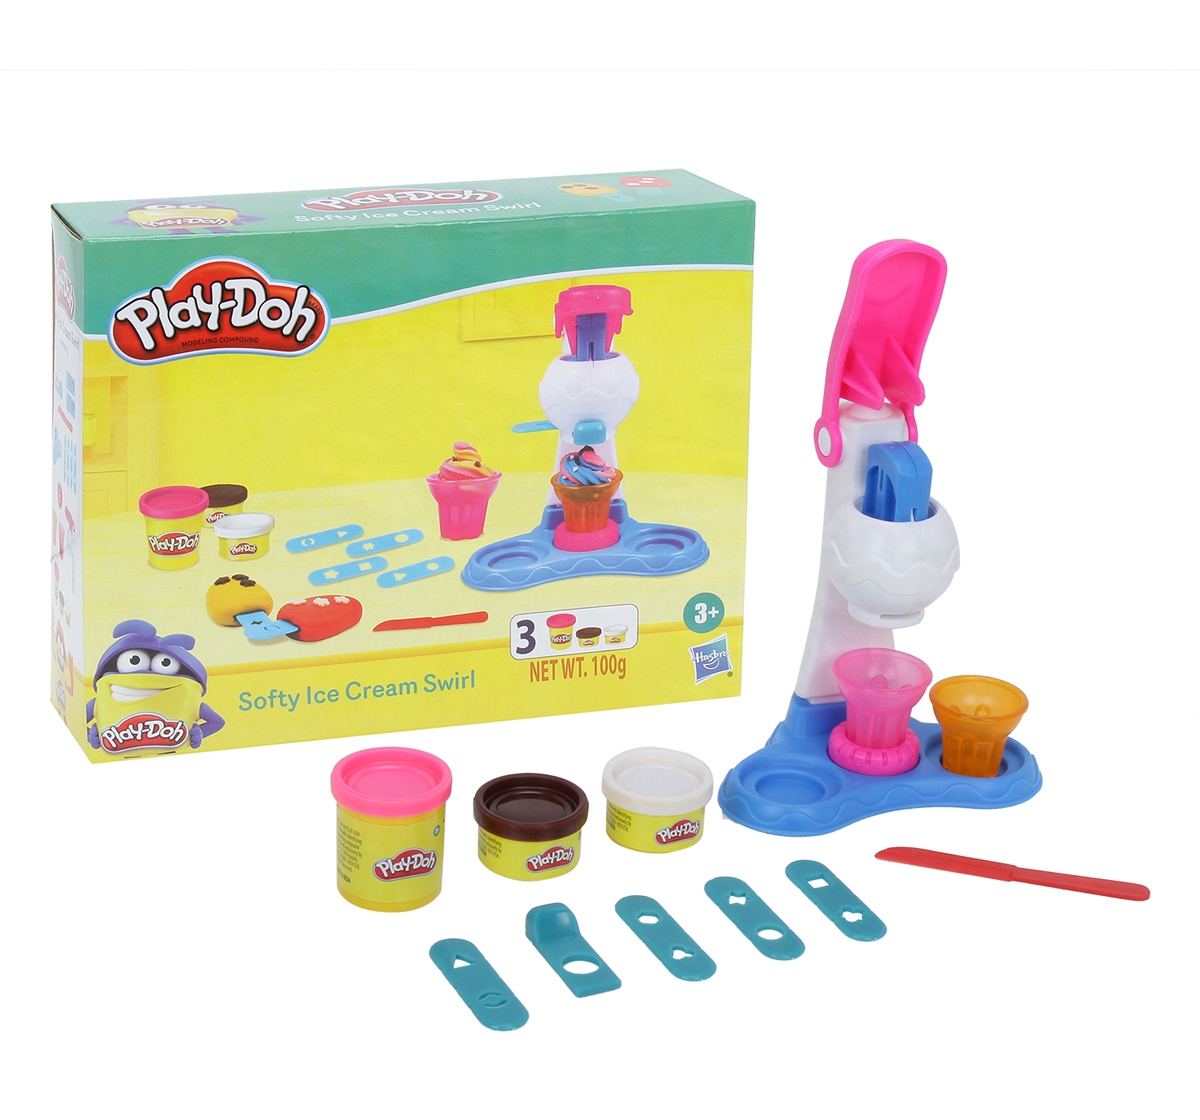 Play-Doh | Play Doh Softy Ice Cream Swirl Playset for Kids 3Y+, Multicolour